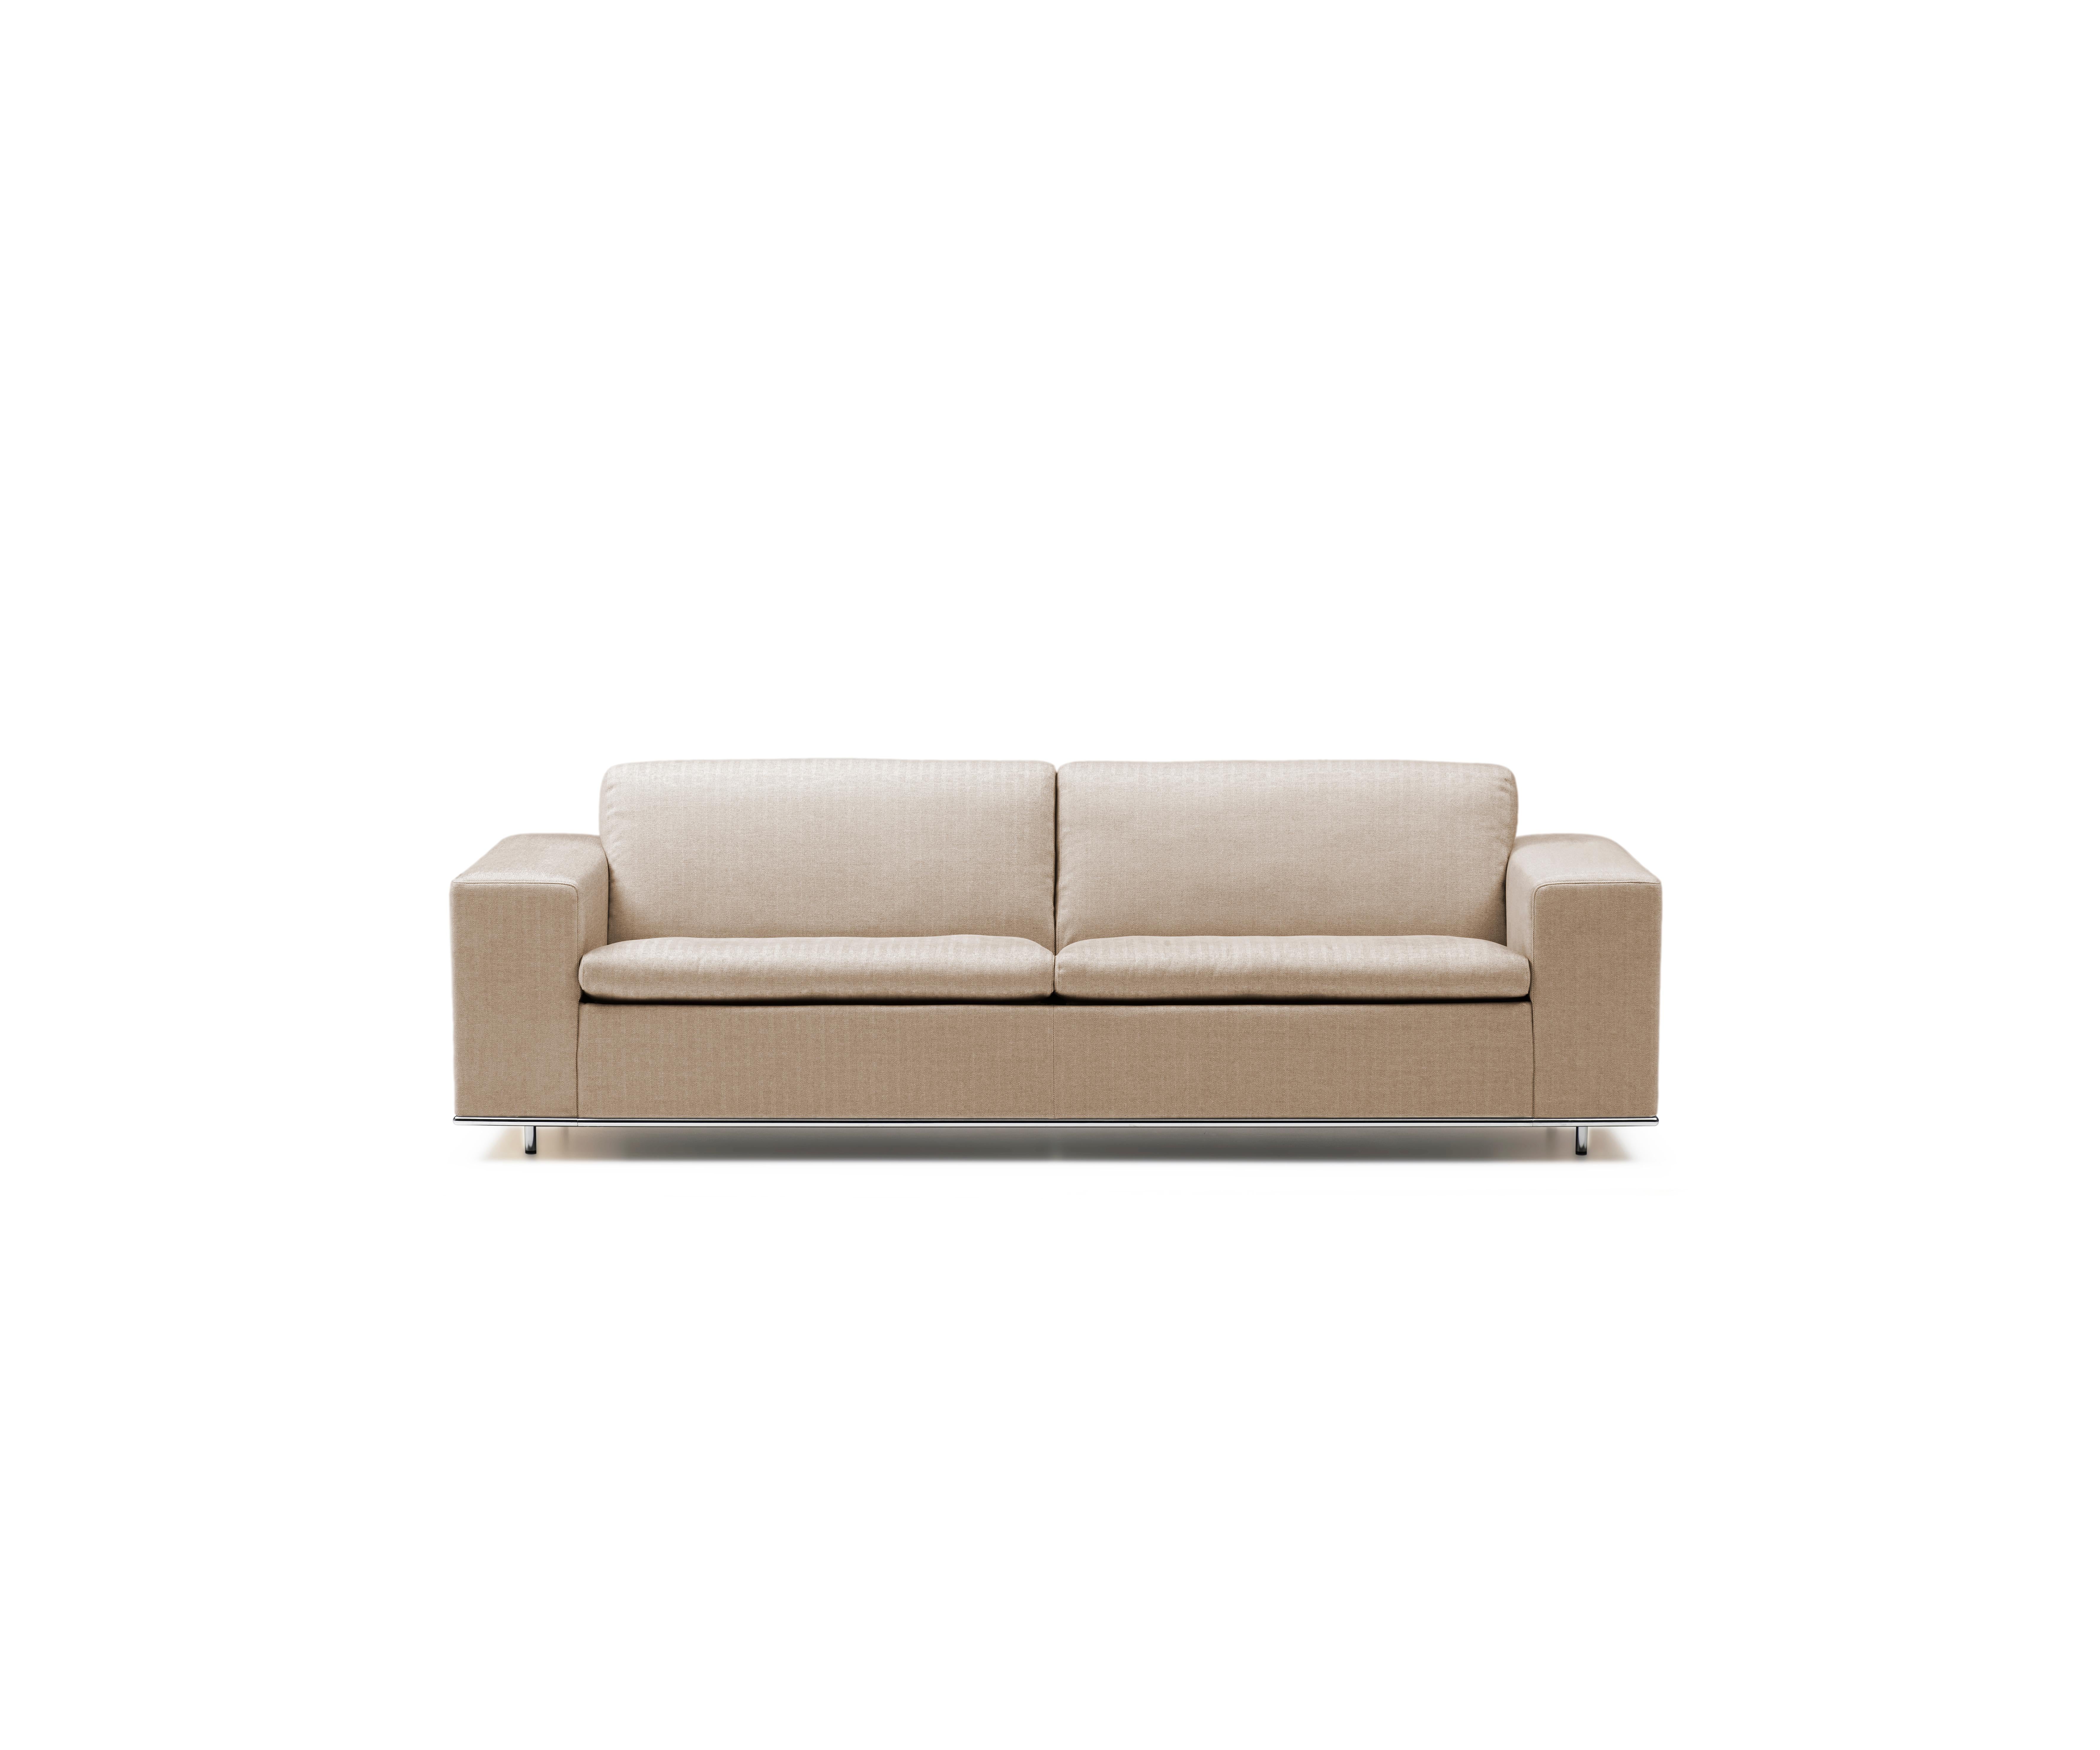 DS-3 sofa by De Sede
Designer: Antonella Scarpitta
Dimensions: D 98 x W 173 x H 80
Materials: frame in solid beech, belted suspension; 
seat and back cushions: SEDEX upholstery, with SEDE-Fa covering (leather/fabric)
Available in a variety of